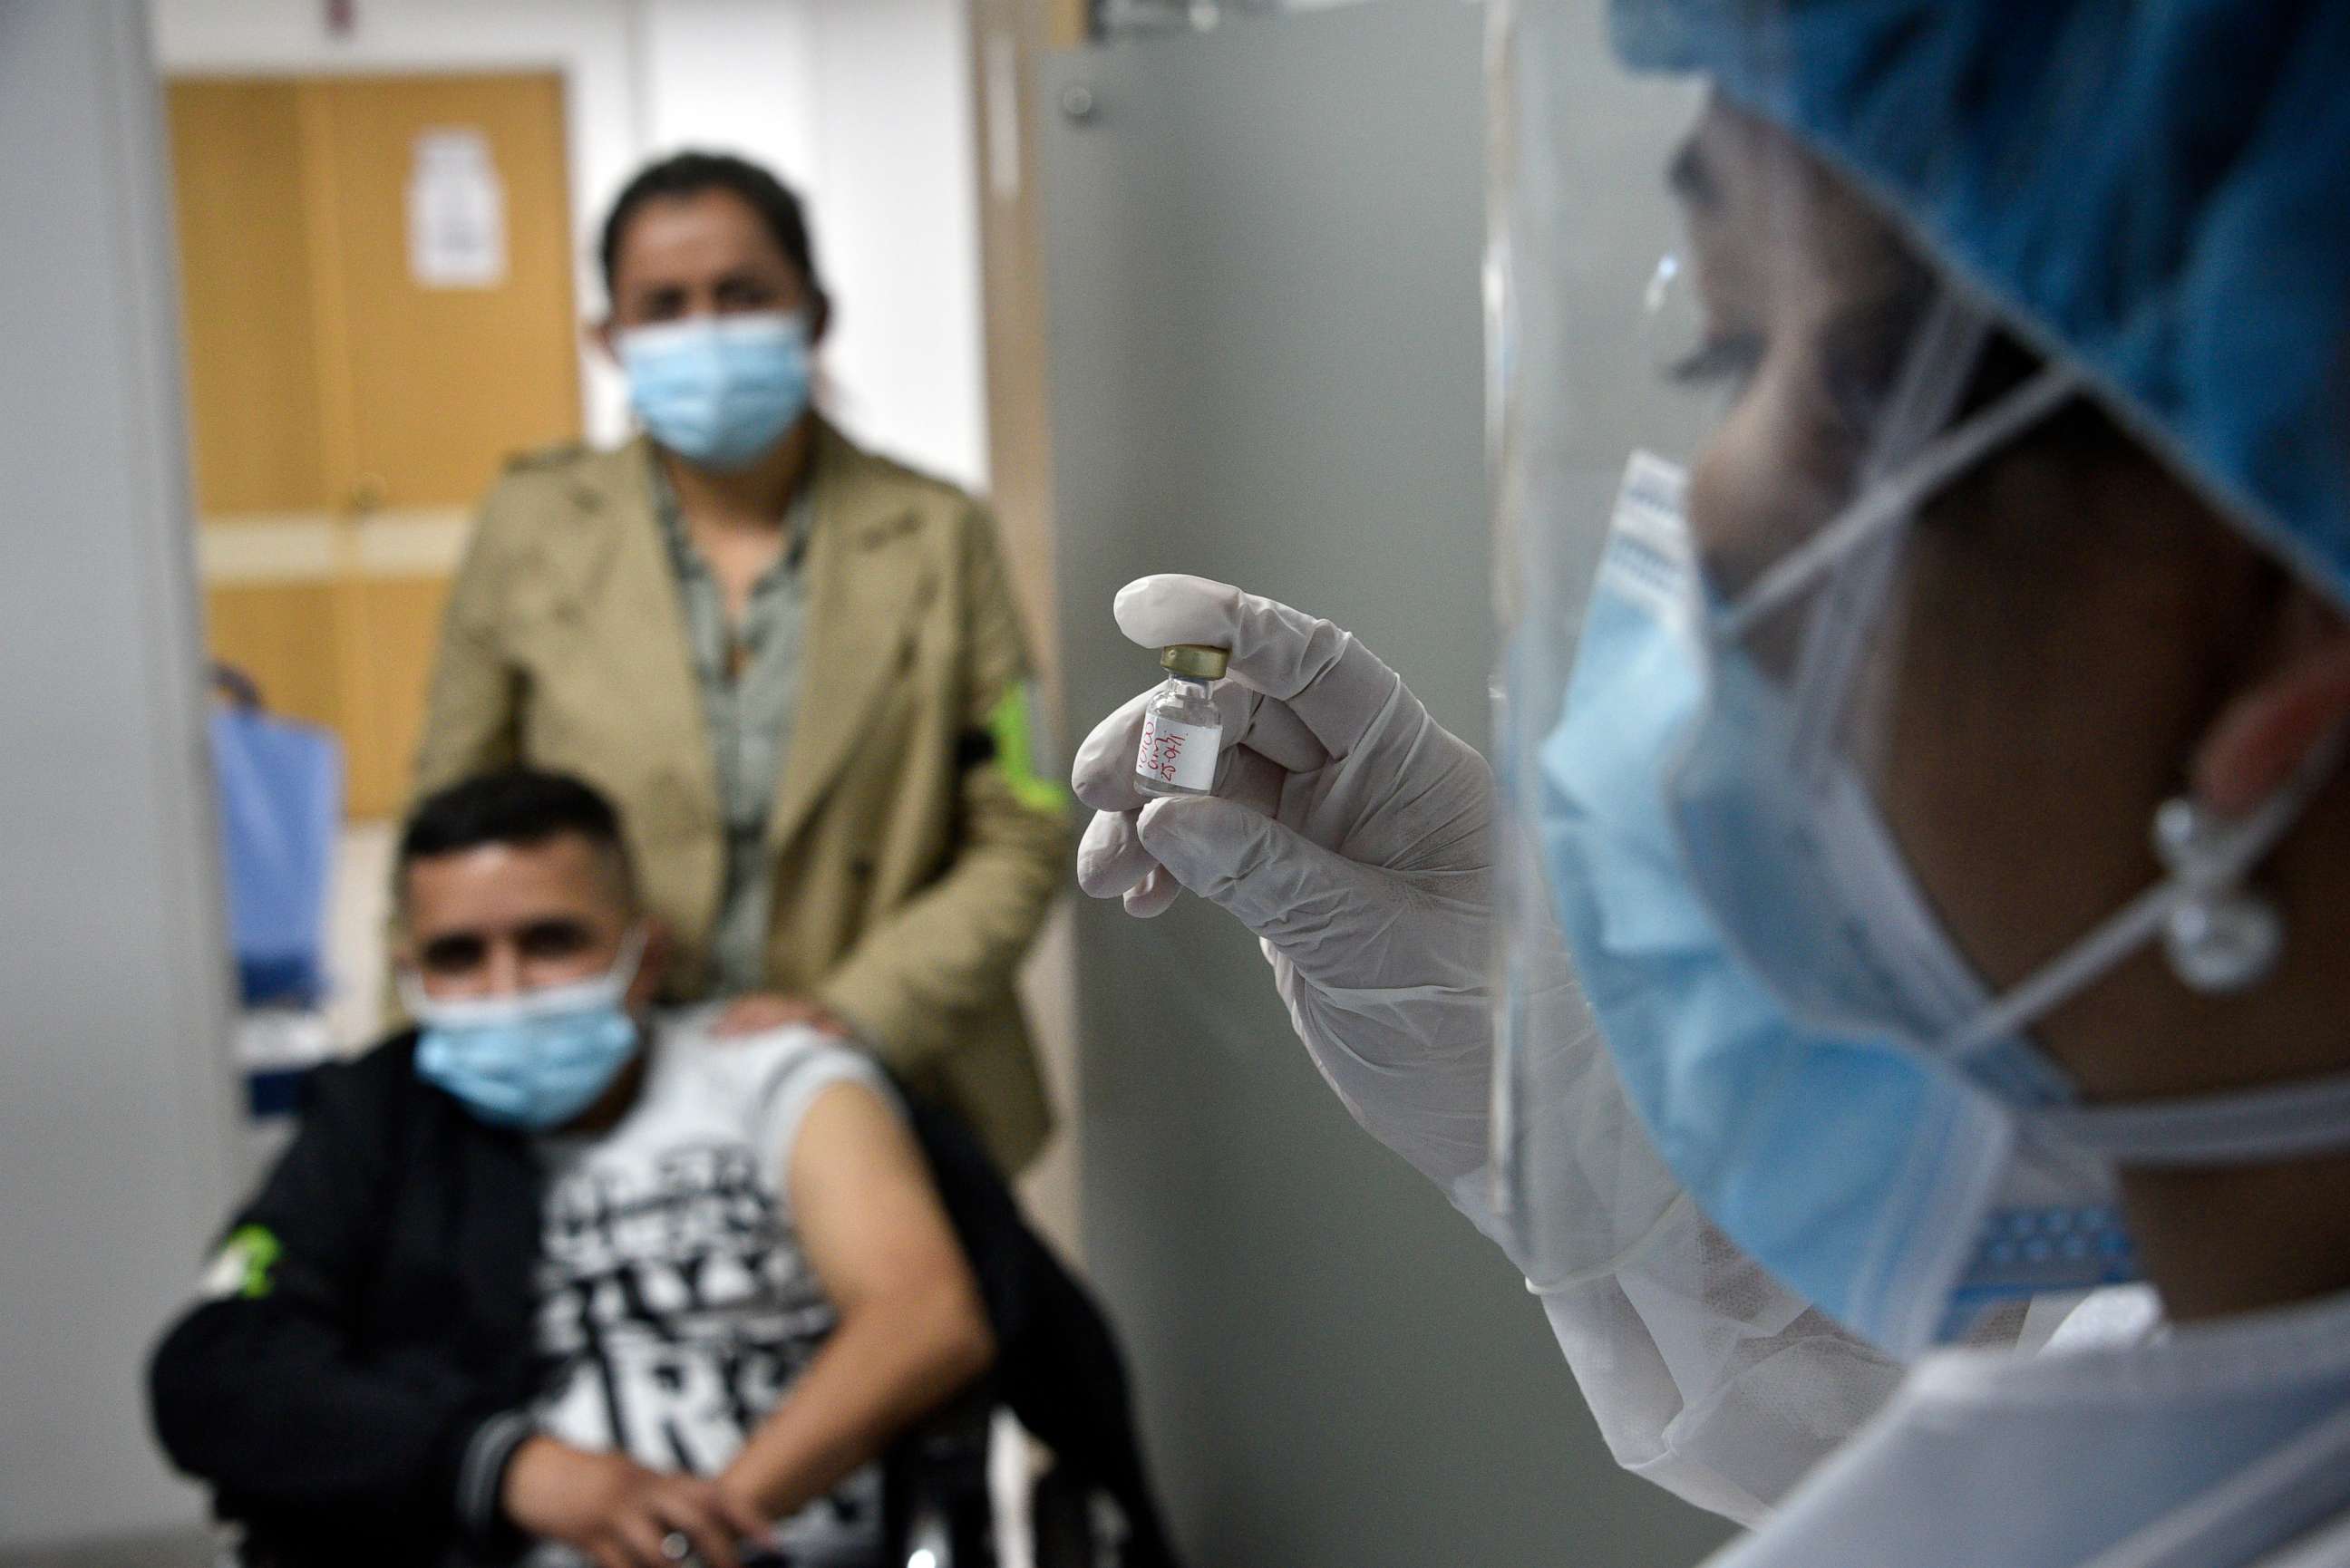 PHOTO: A health worker holds a dose during a vaccination drill before the arrival of the COVID-19 vaccine at Patio Bonito Tintal hospital on Jan. 26, 2021, in Bogota, Colombia.